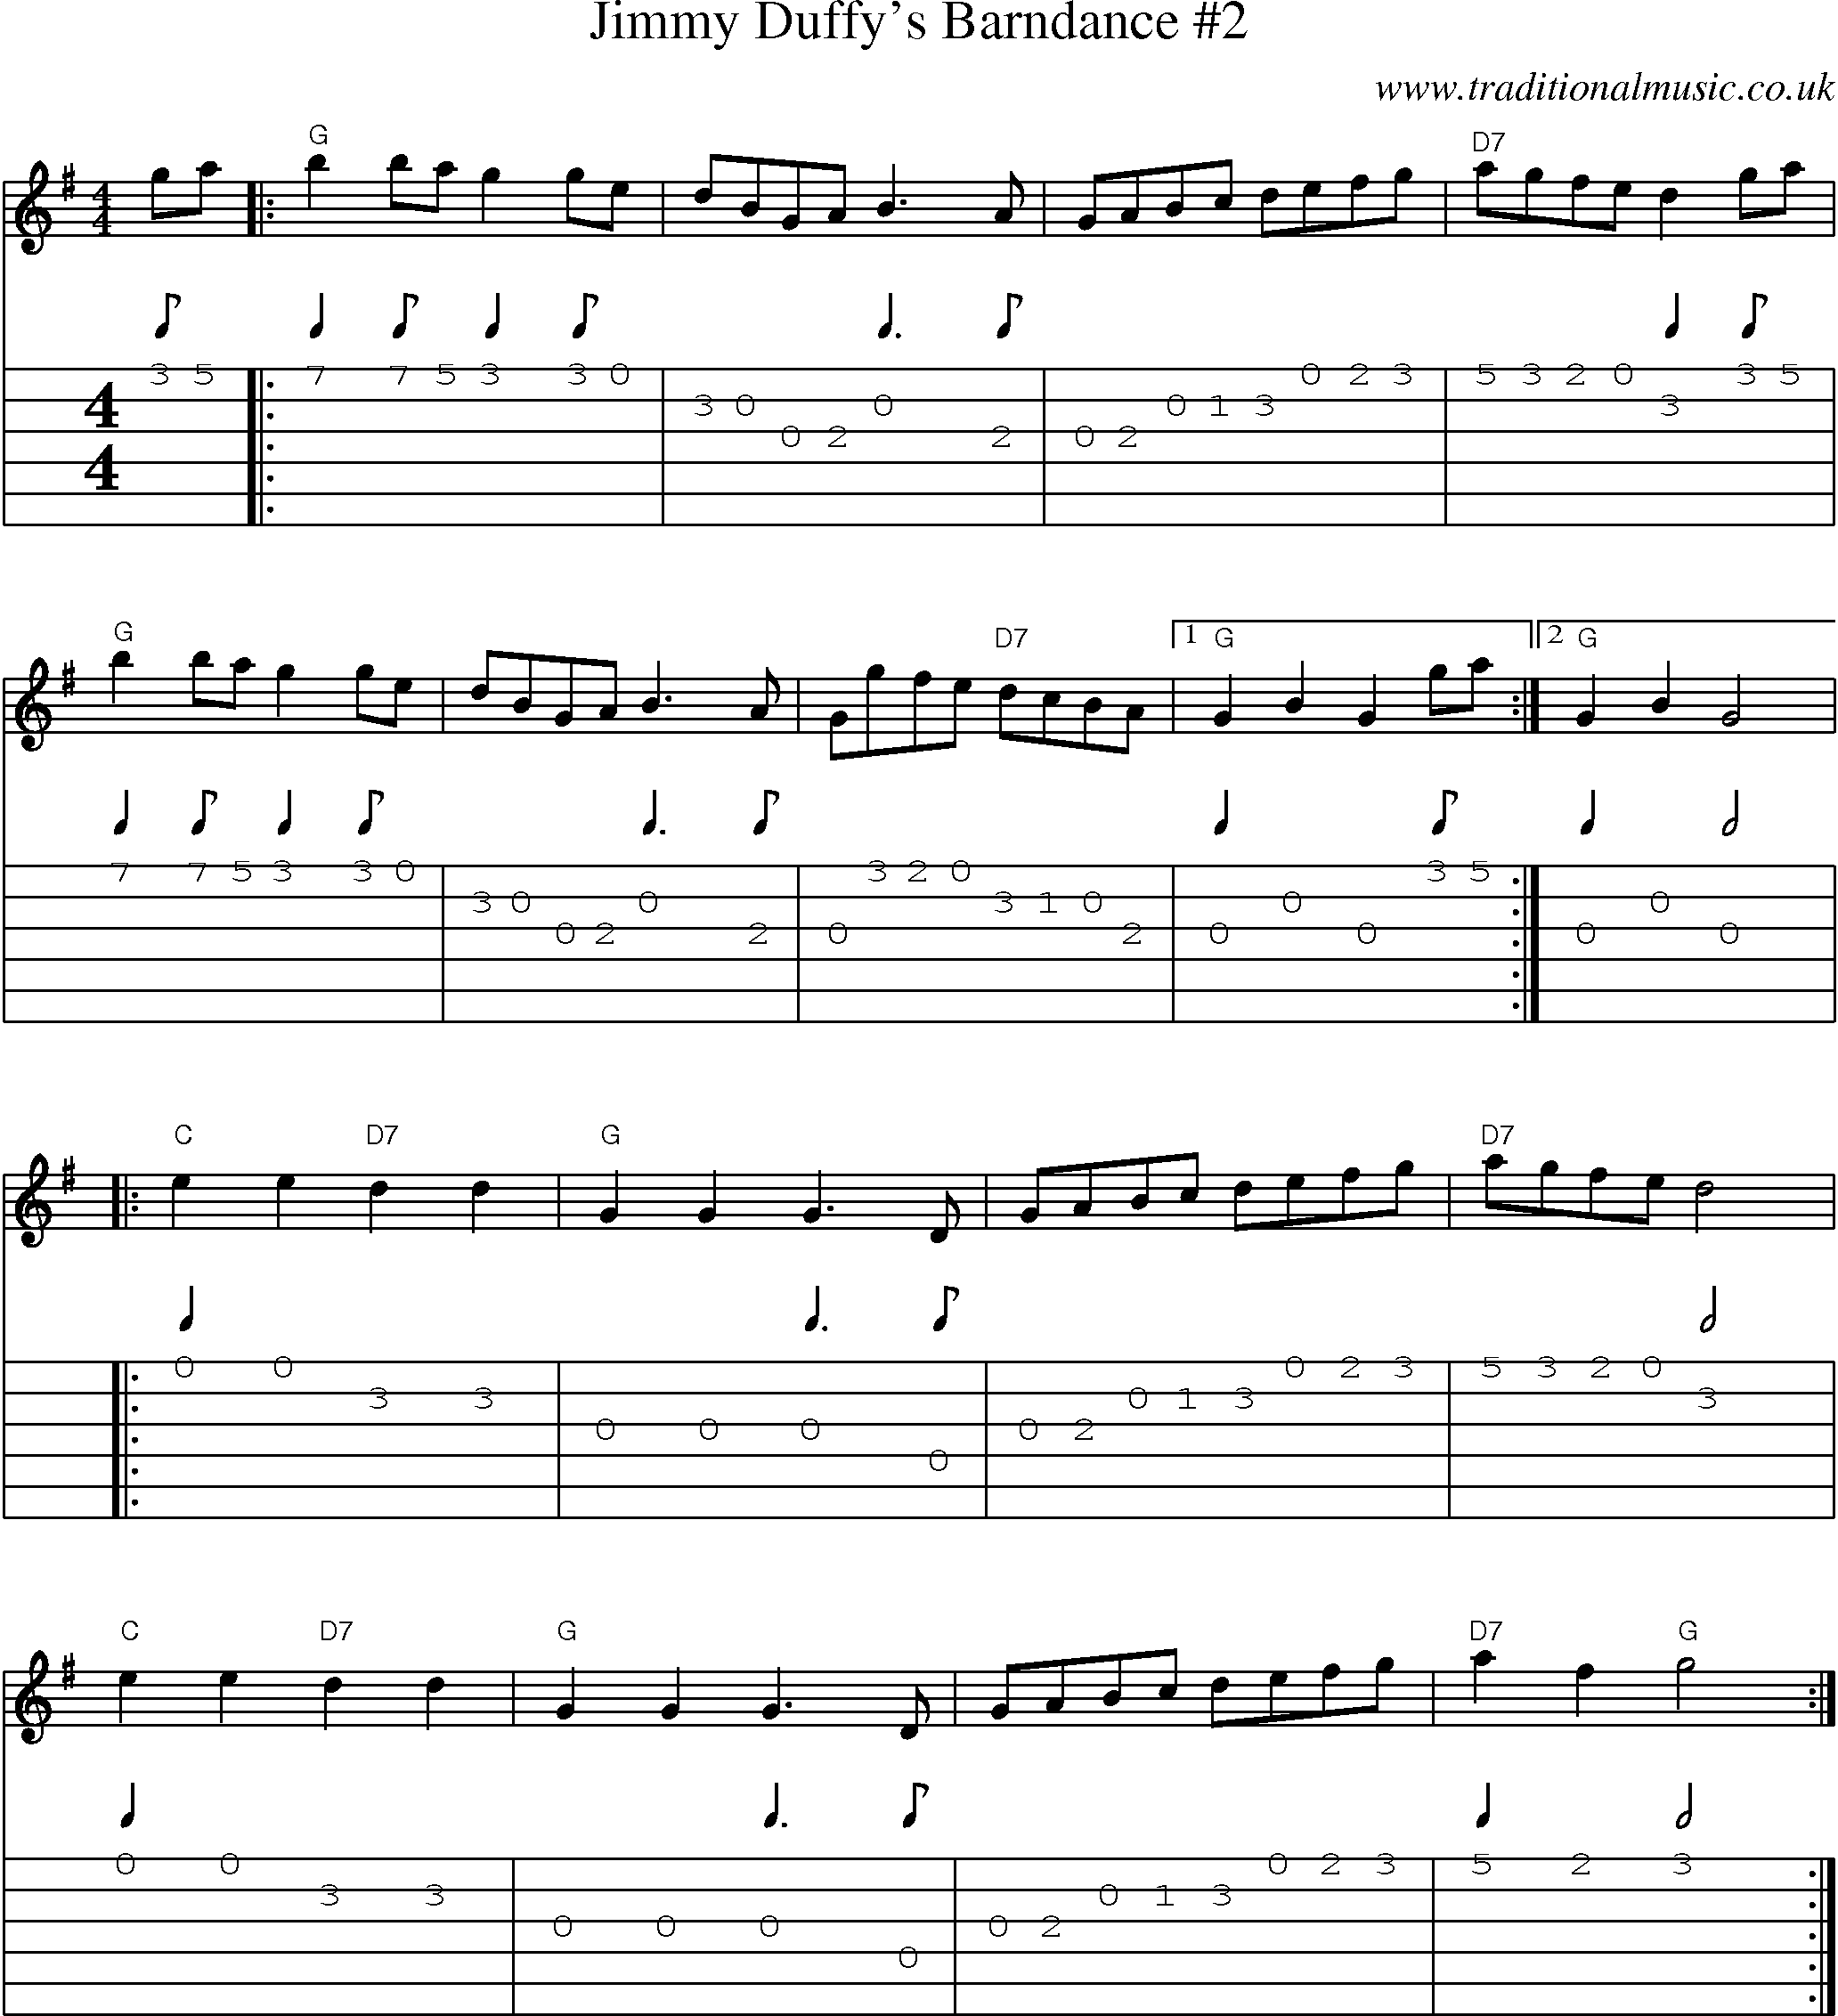 Music Score and Guitar Tabs for Jimmy Duffys Barndance 2